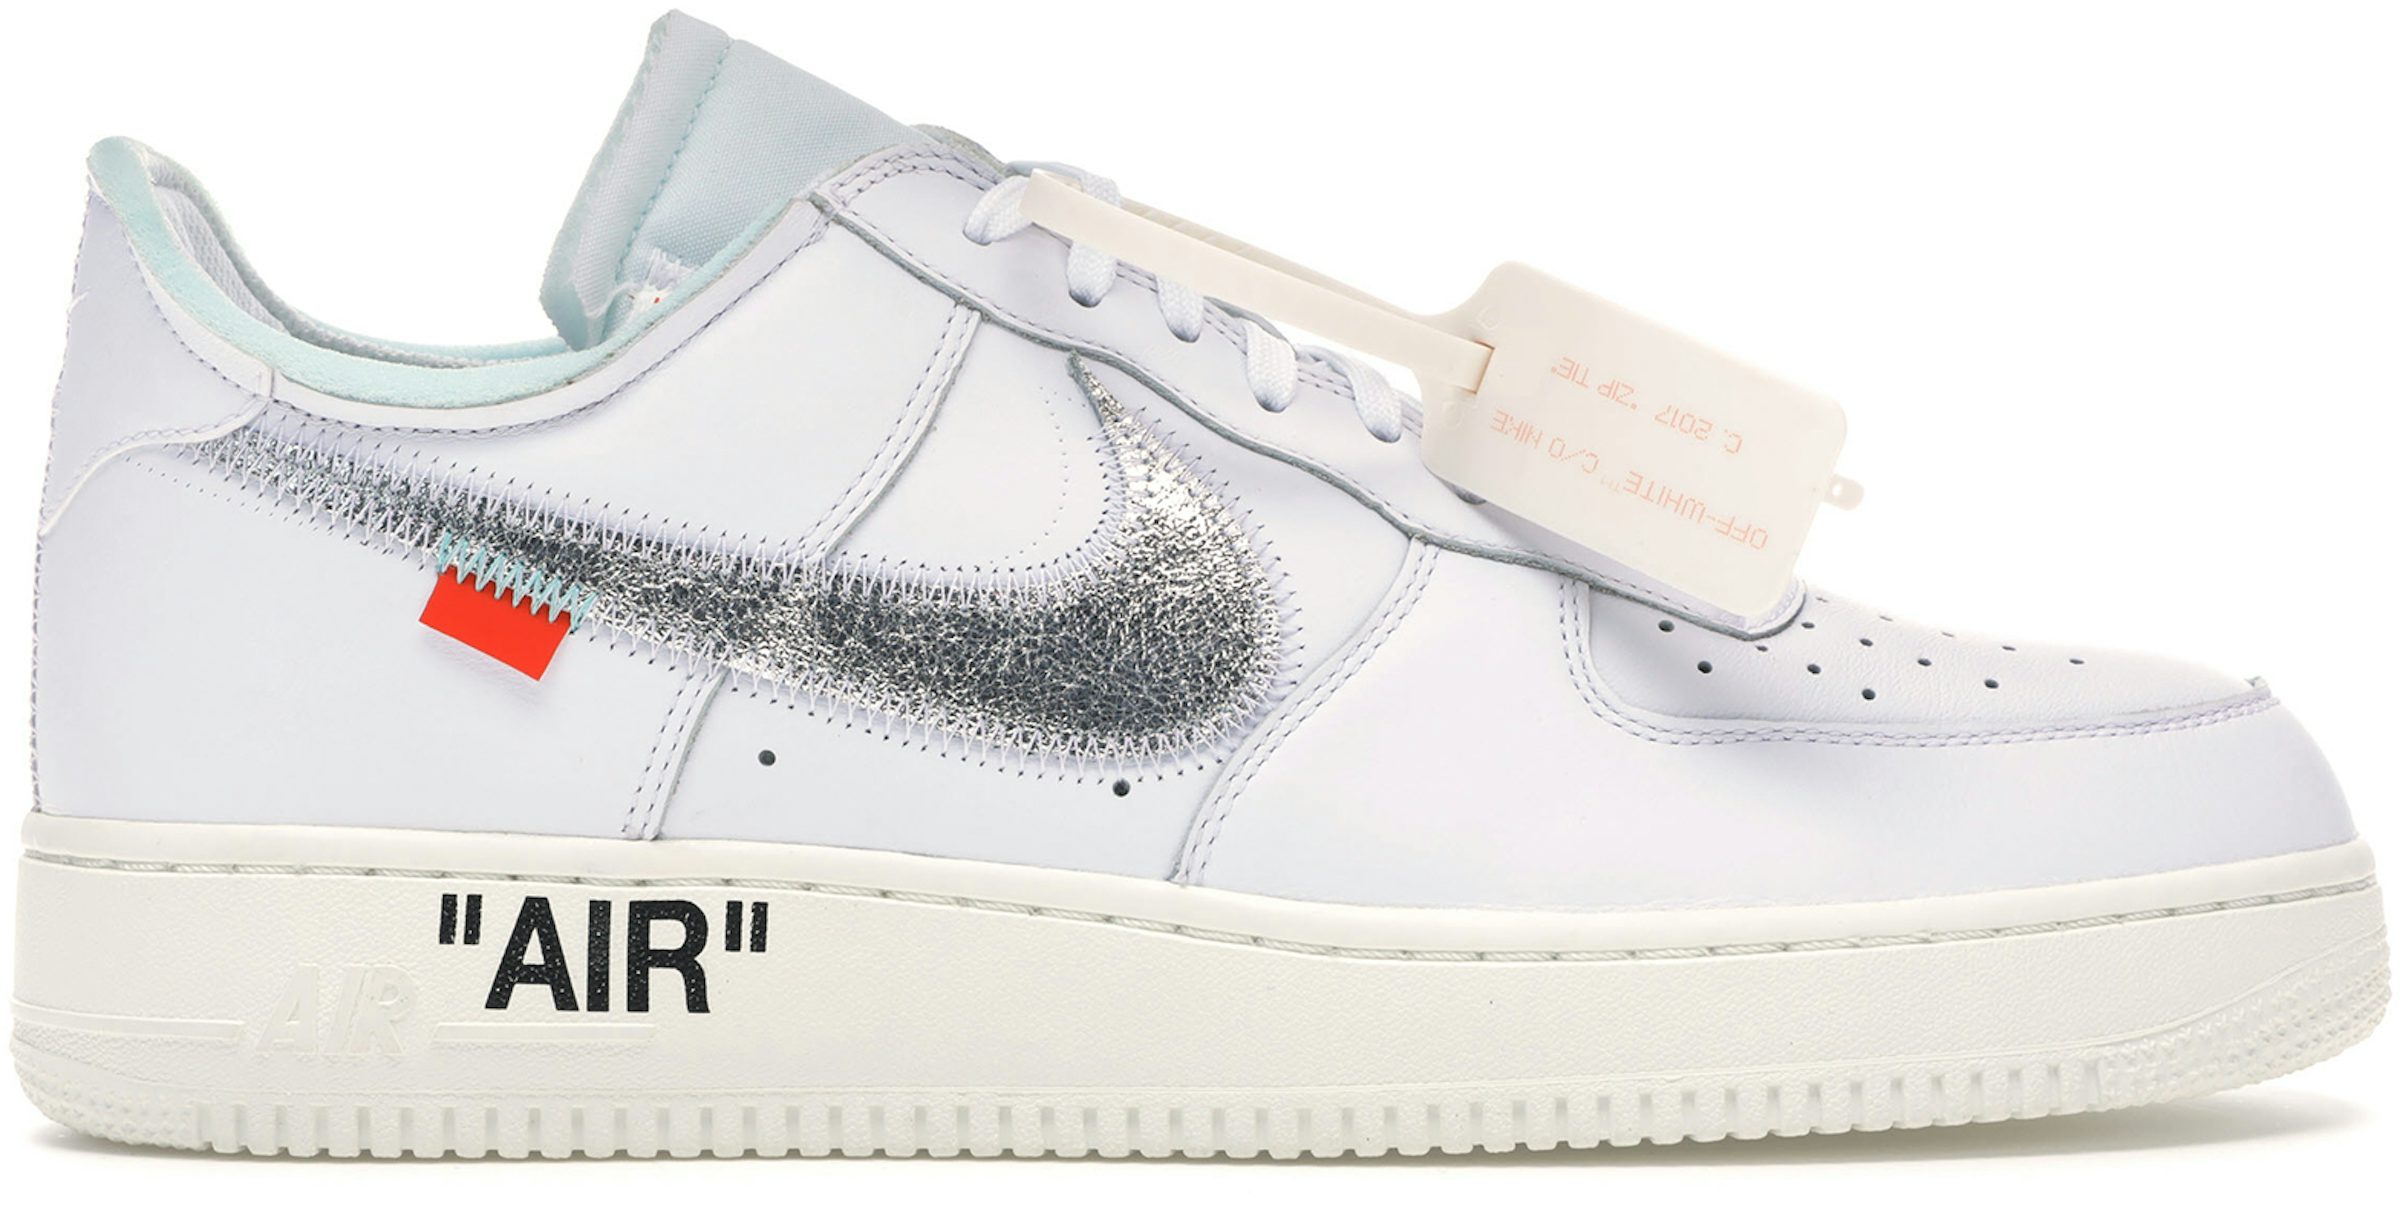 Nike x Off-White Air Force 1 (AF-1). #Air #Offwhite 2018Clothing